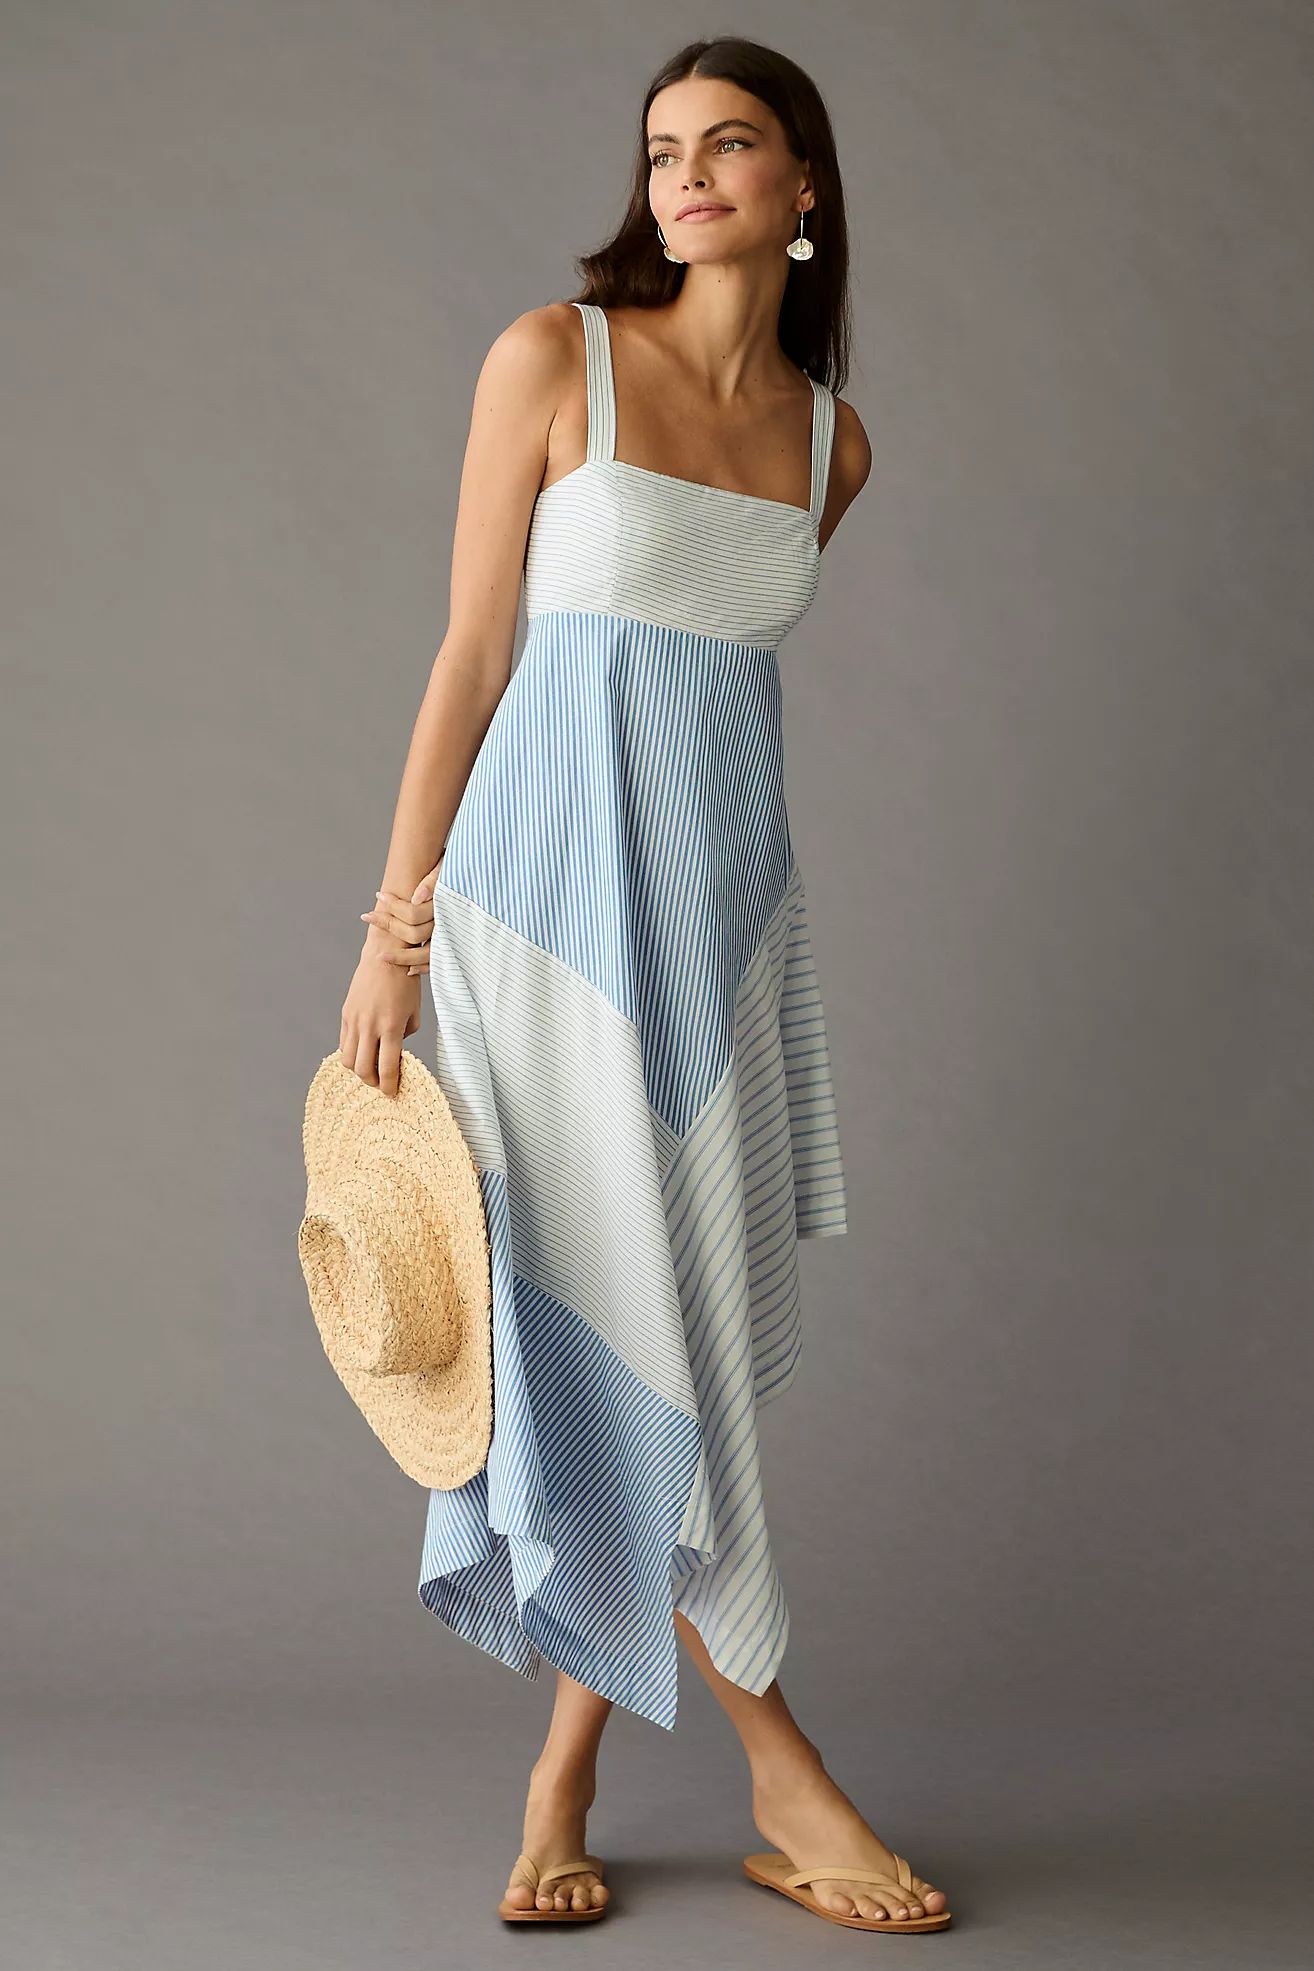 By Anthropologie Asymmetrical Square-Neck Dress | Anthropologie (US)